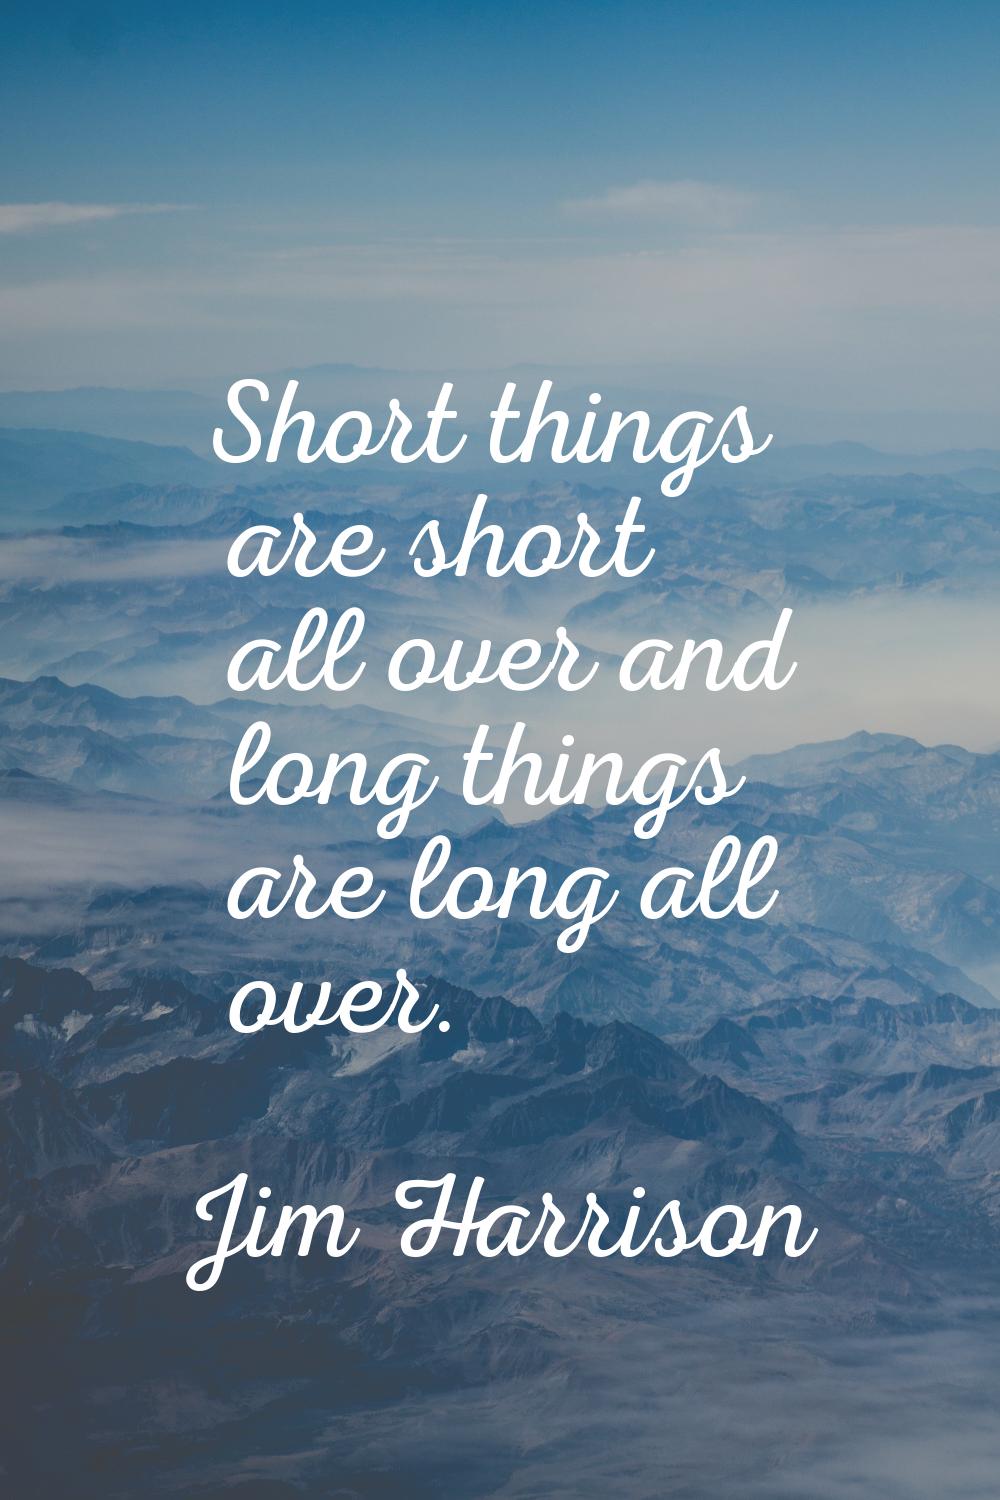 Short things are short all over and long things are long all over.